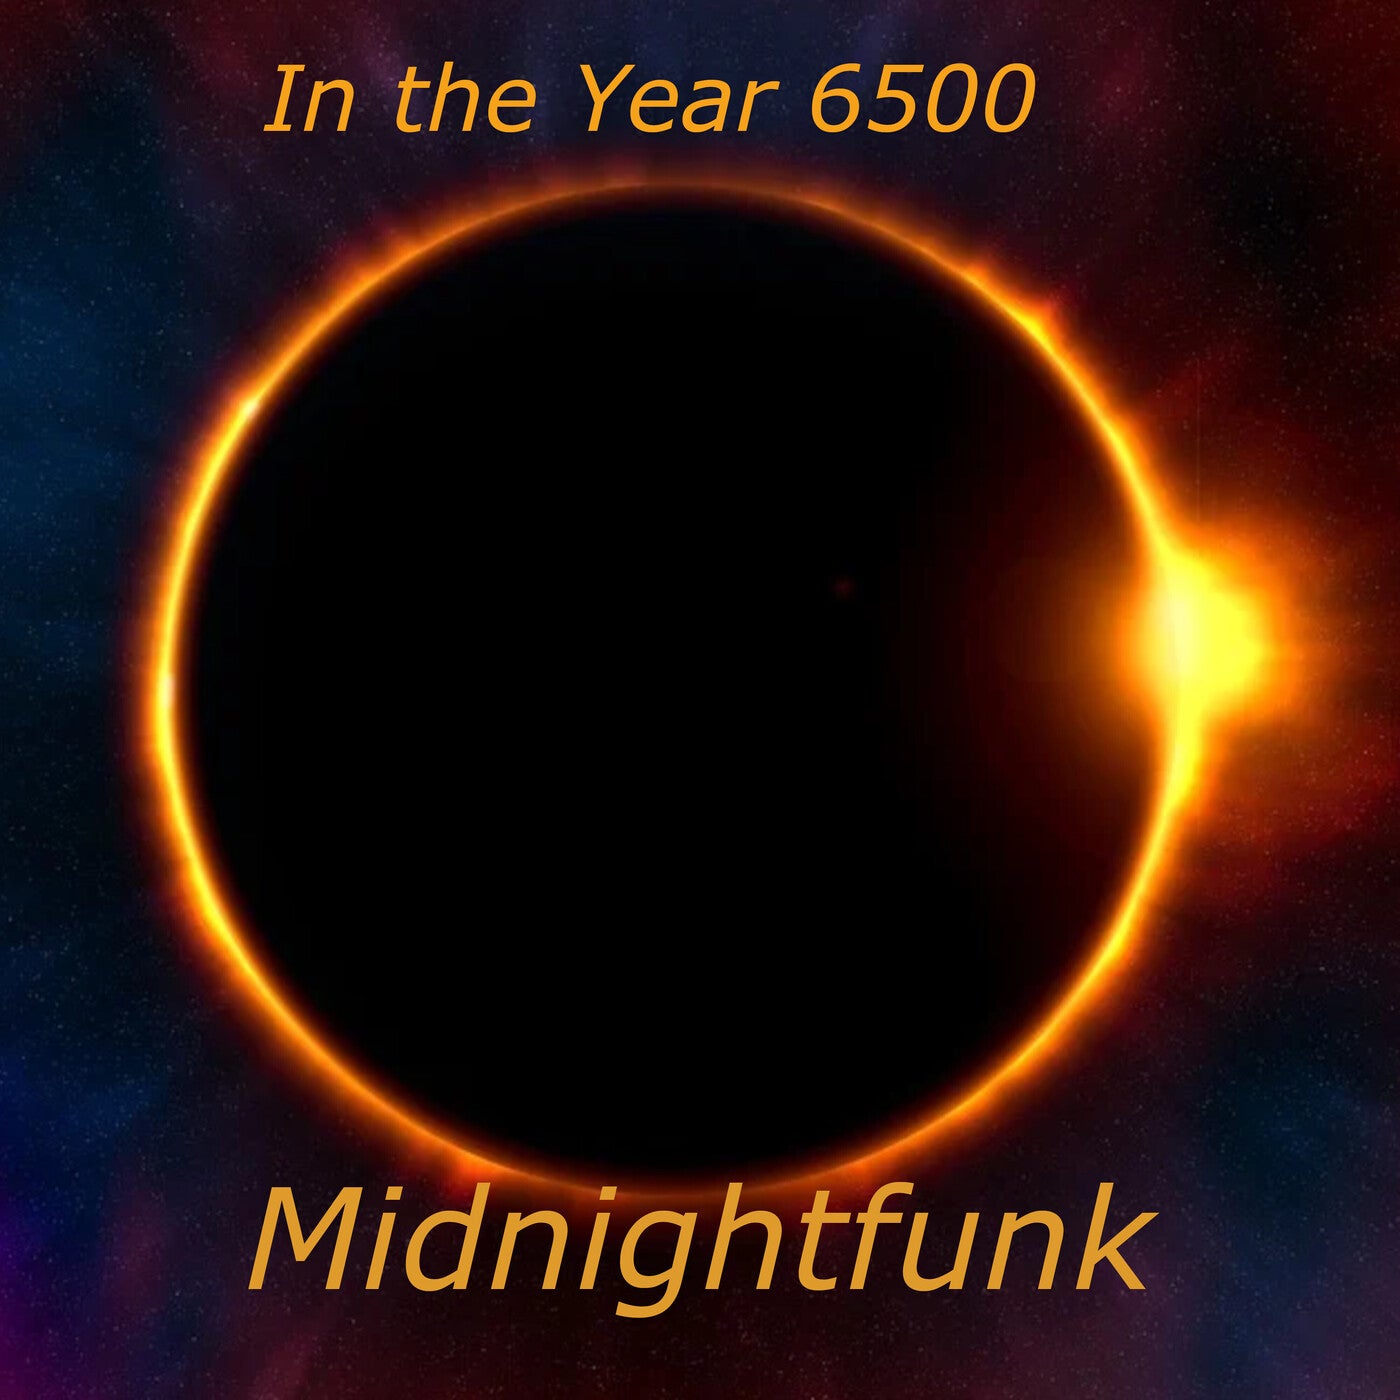 In the Year 6500